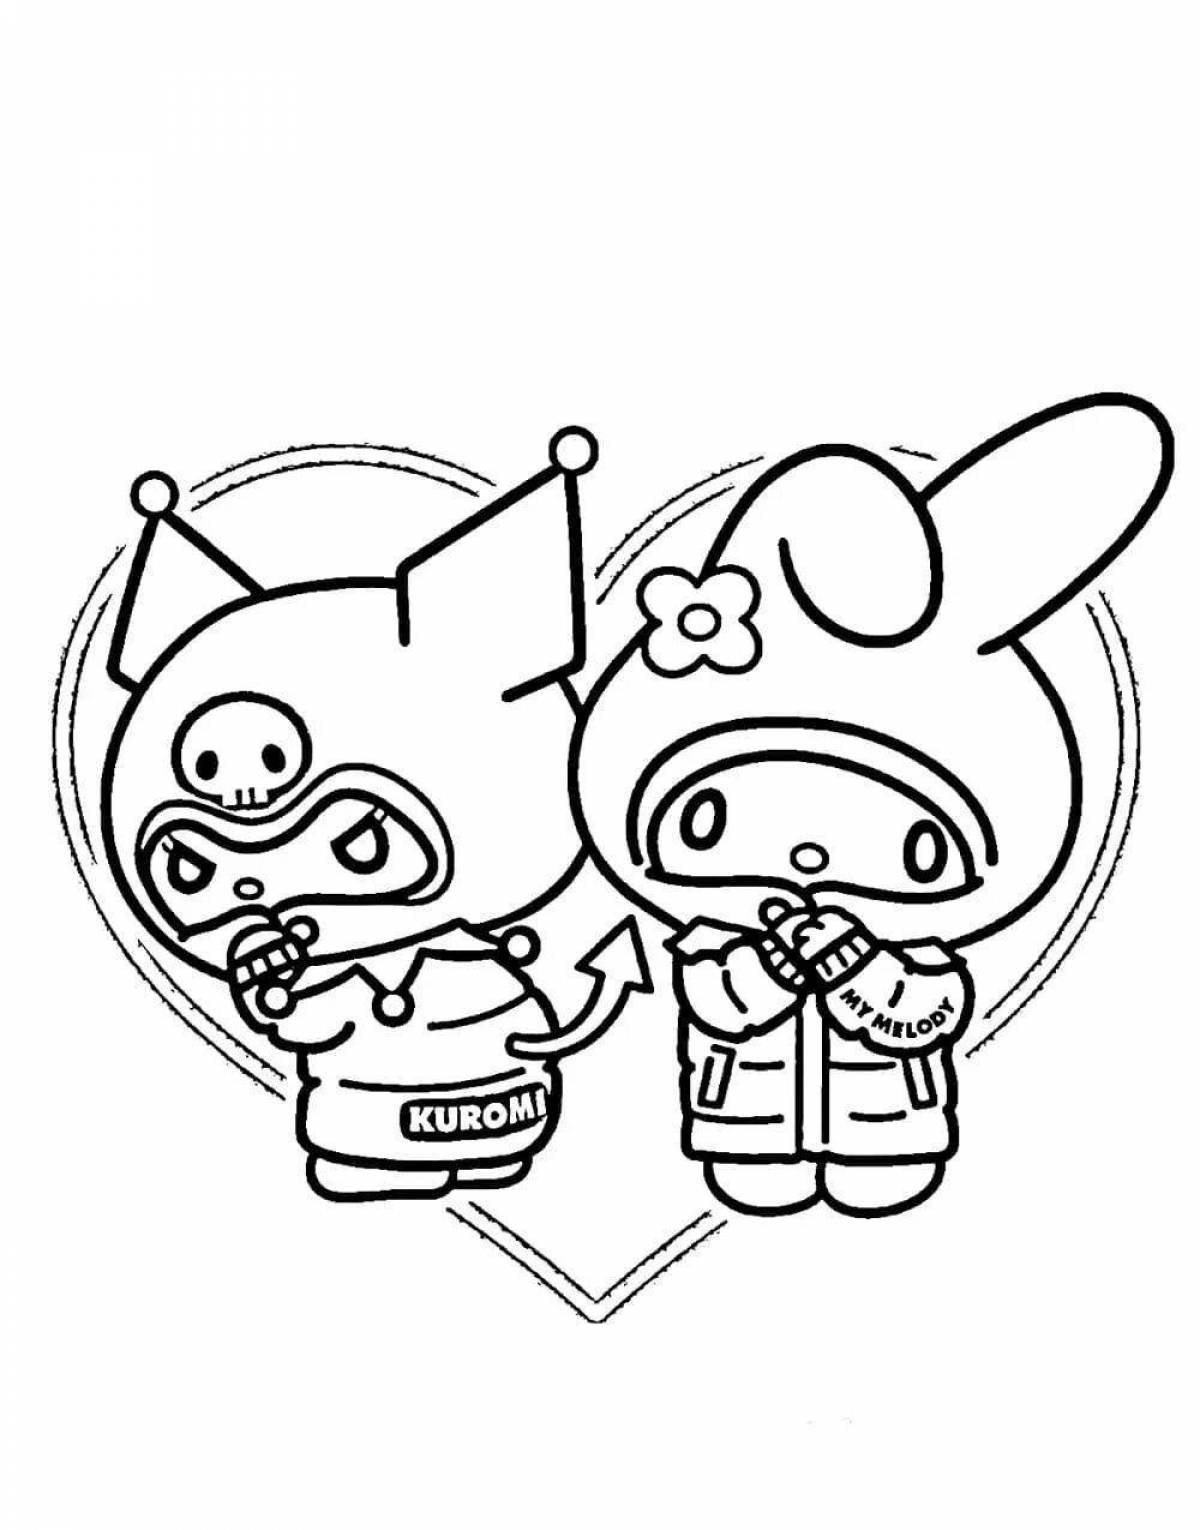 Kuromi happy melody coloring page